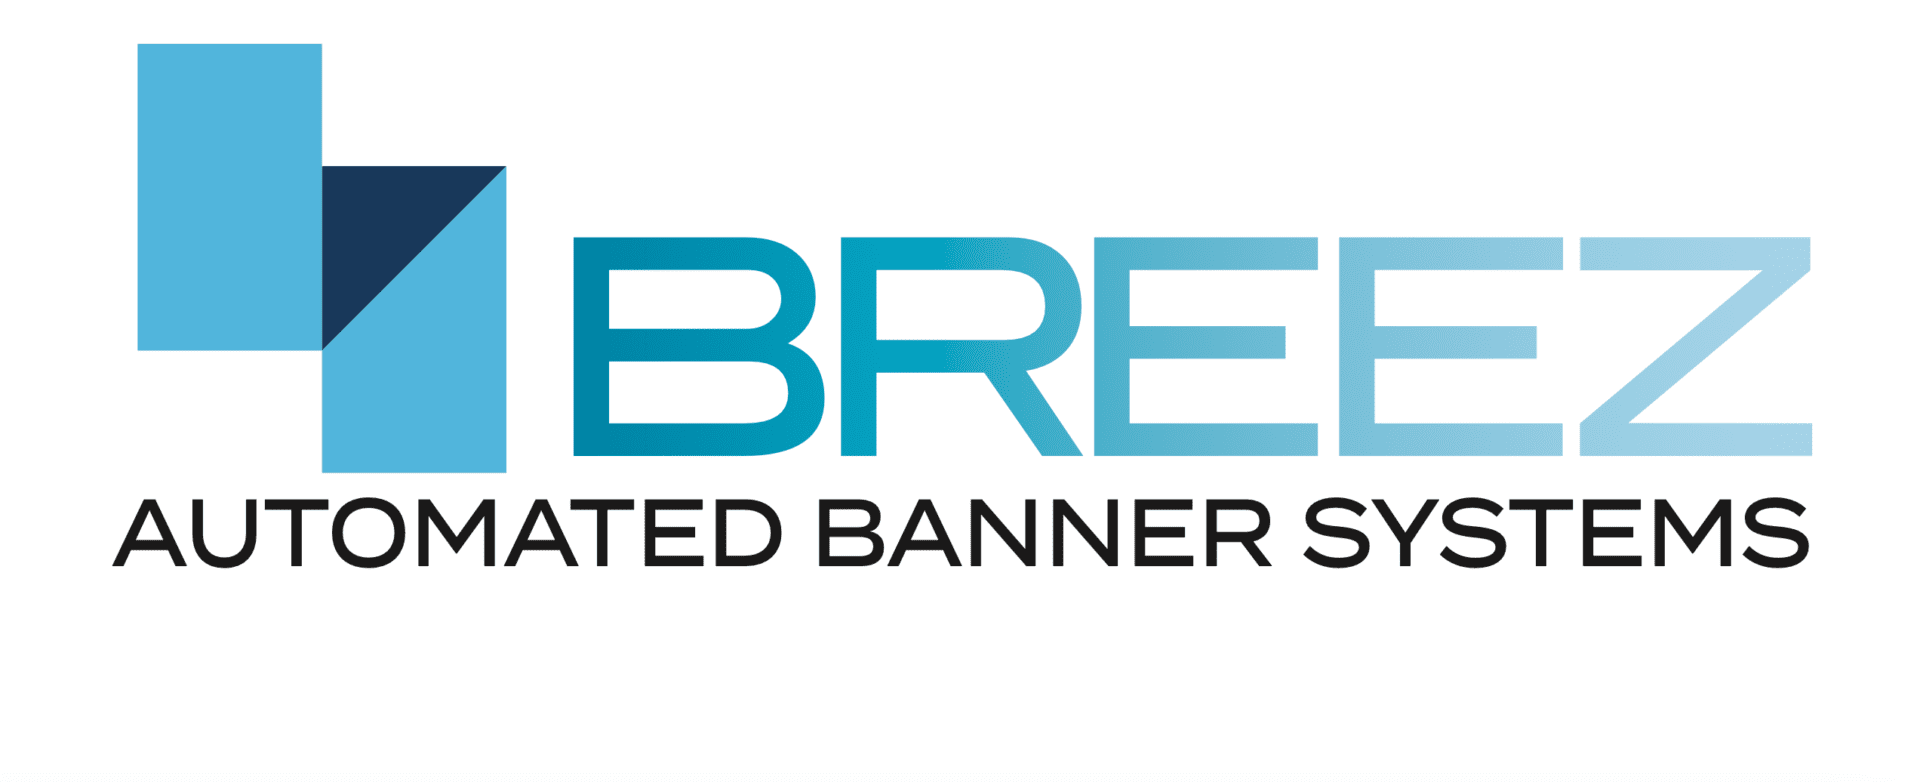 Breez Banner Systems